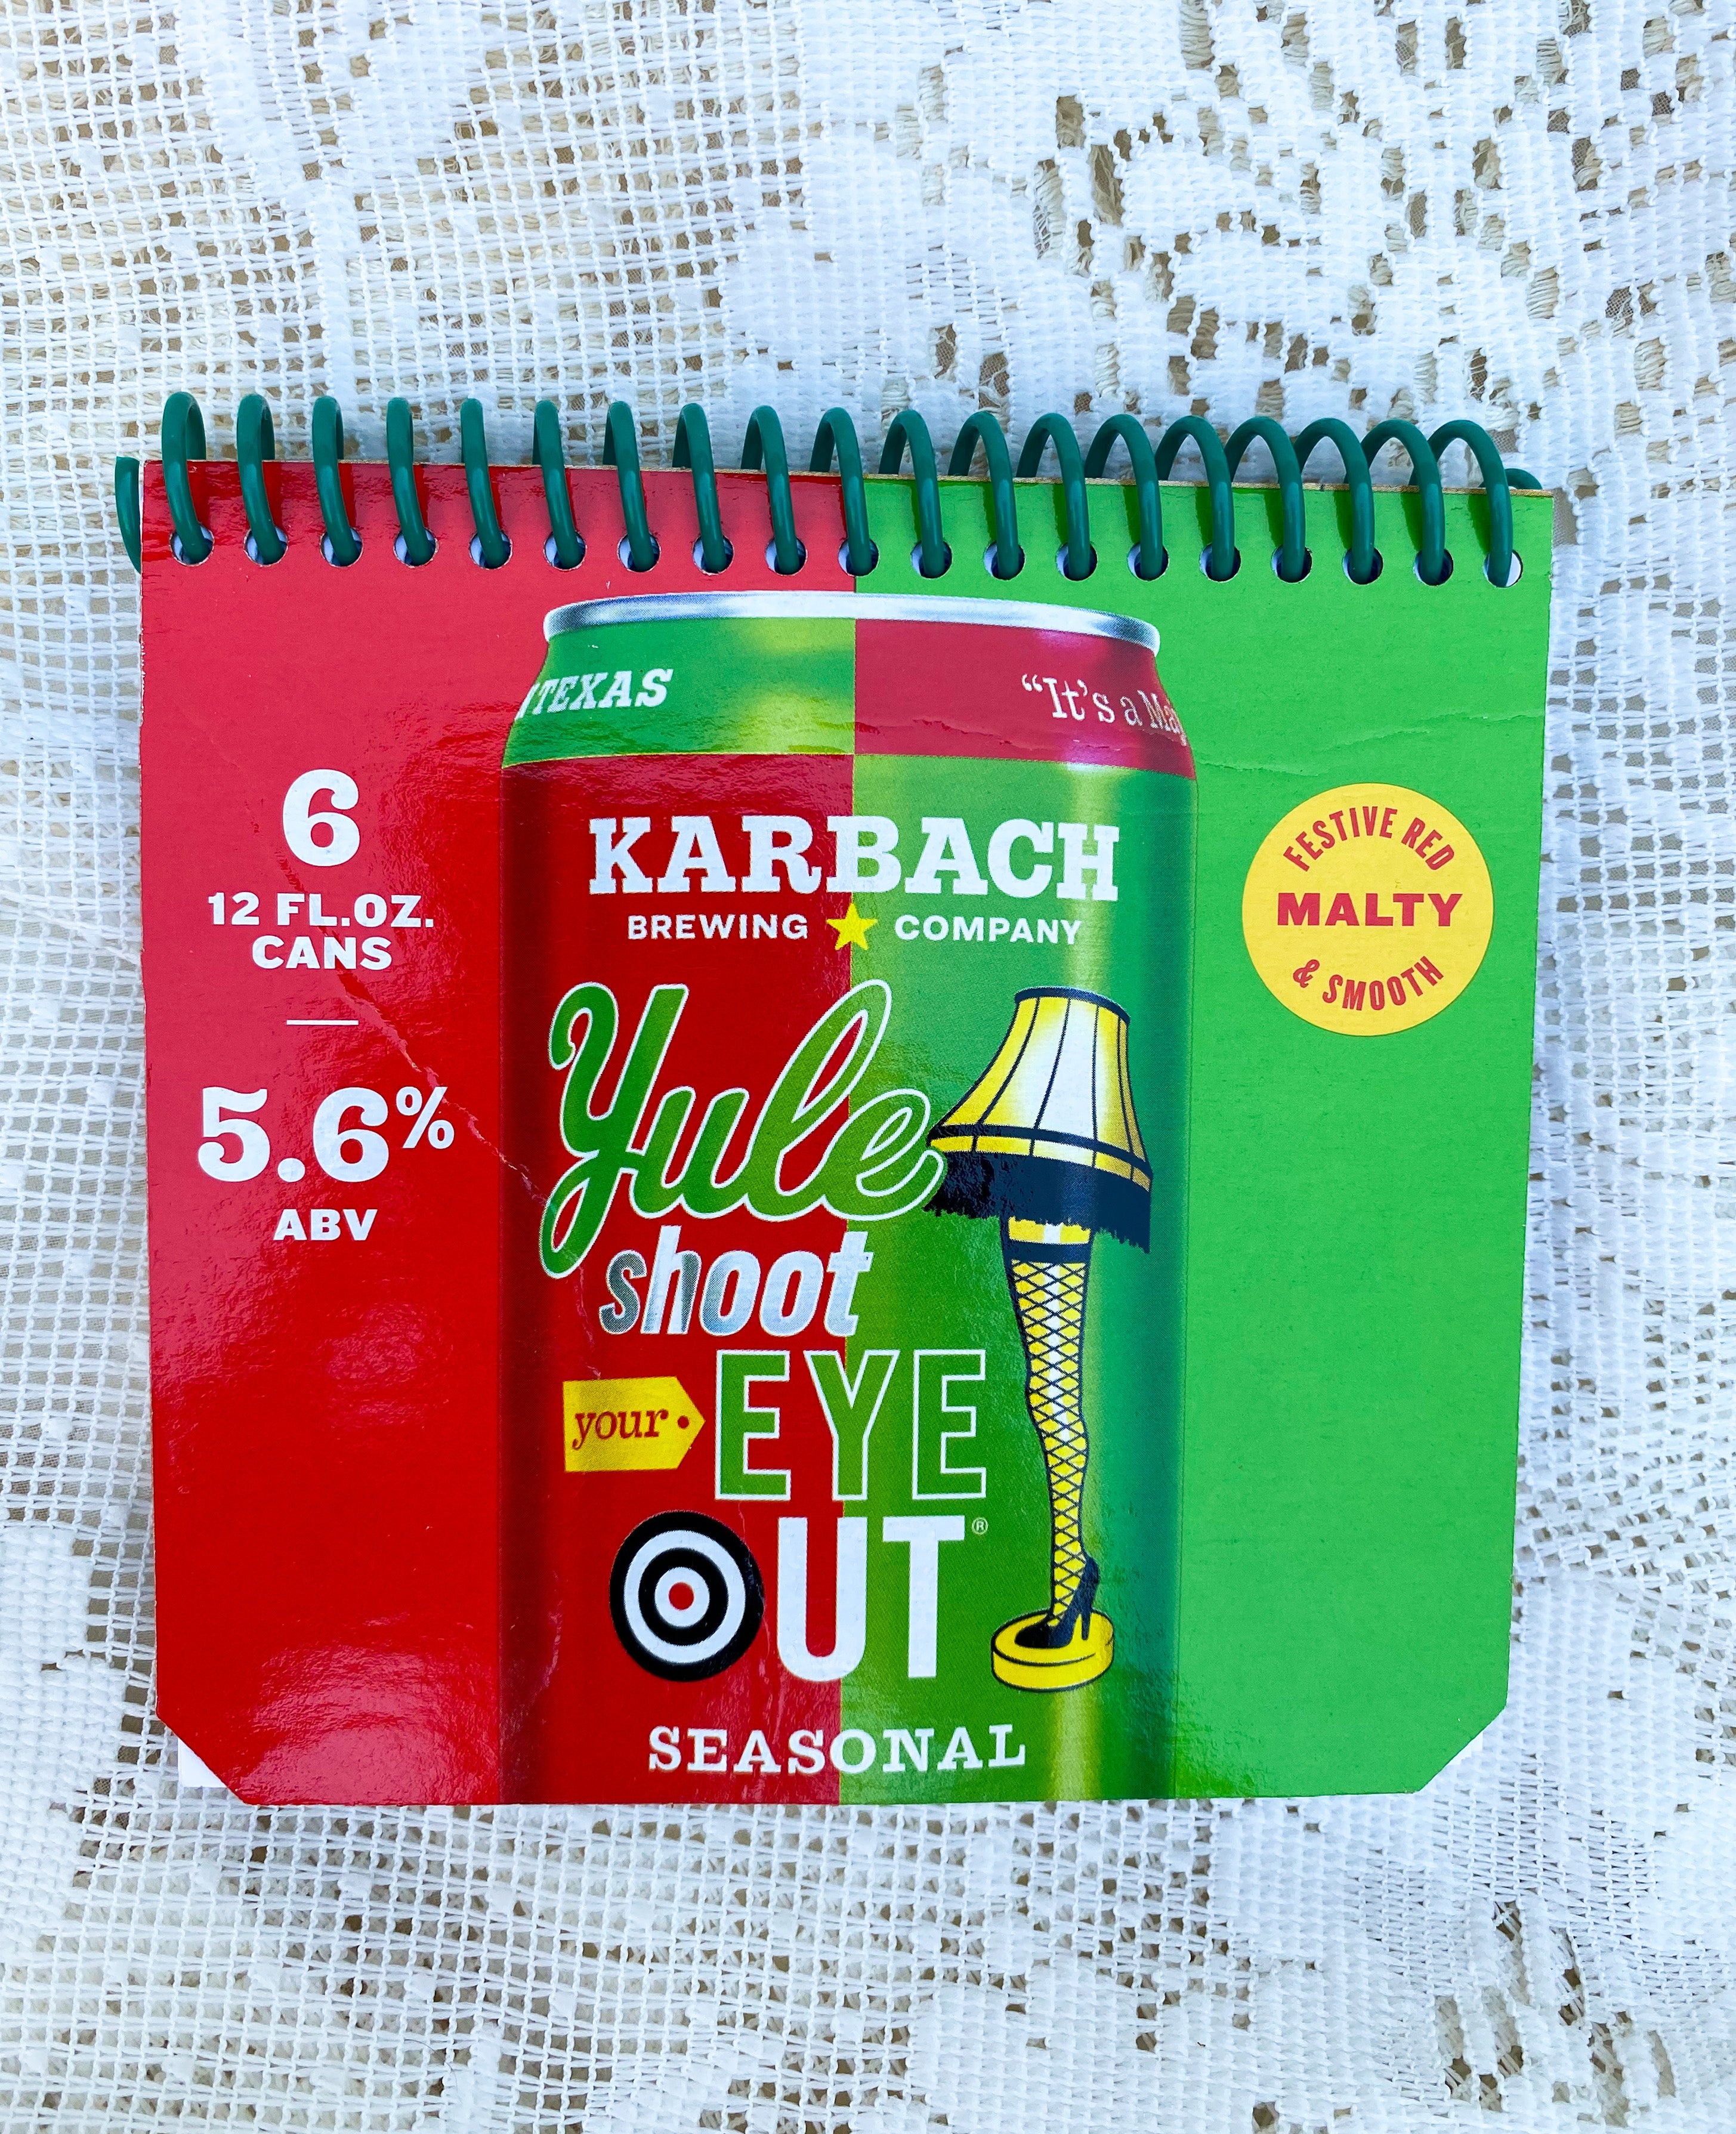 Karbach Yule Shoot Your Eye Out Recycled Beer Carton Notebook